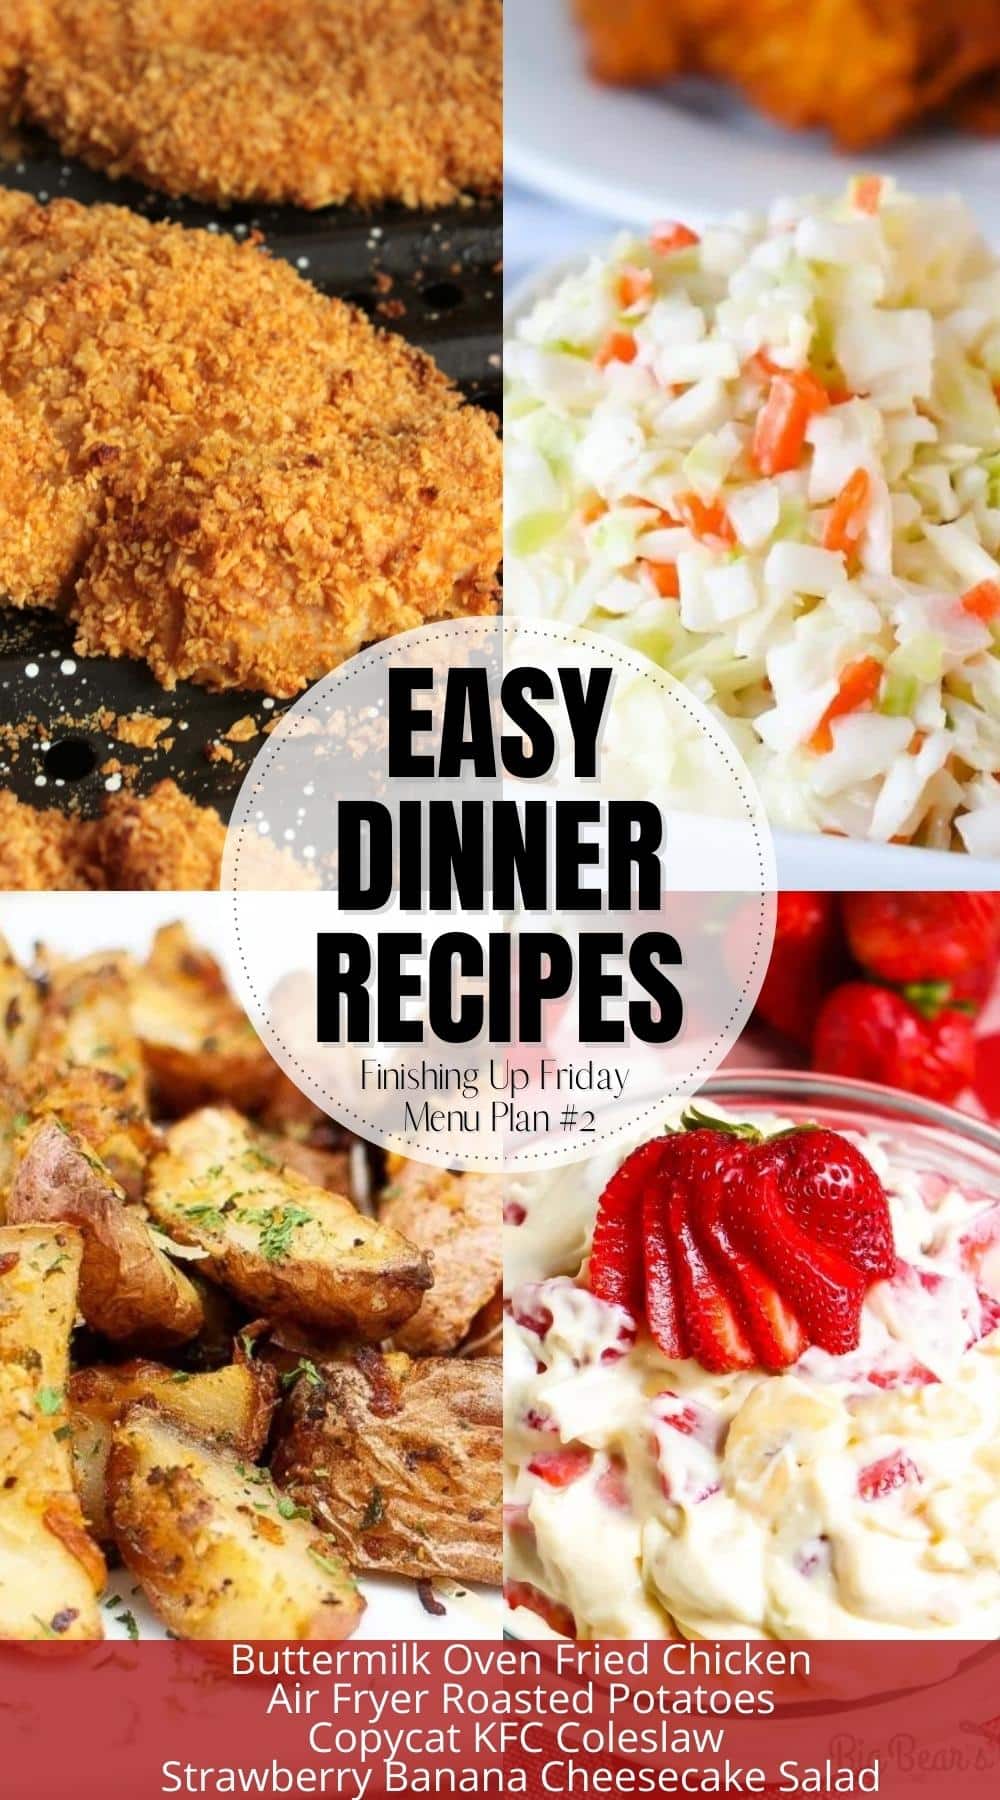 This week's Finishing Up Friday Menu Plan is about recreating a take out classic! We're featuring a Buttermilk Oven Fried Chicken as our main entrée and serving up some perfectly cooked air fryer roasted potatoes and Copycat KFC Coleslaw for our sides plus a summer time favorite of Strawberry Banana Cheesecake Salad to end the meal!  via @bigbearswife